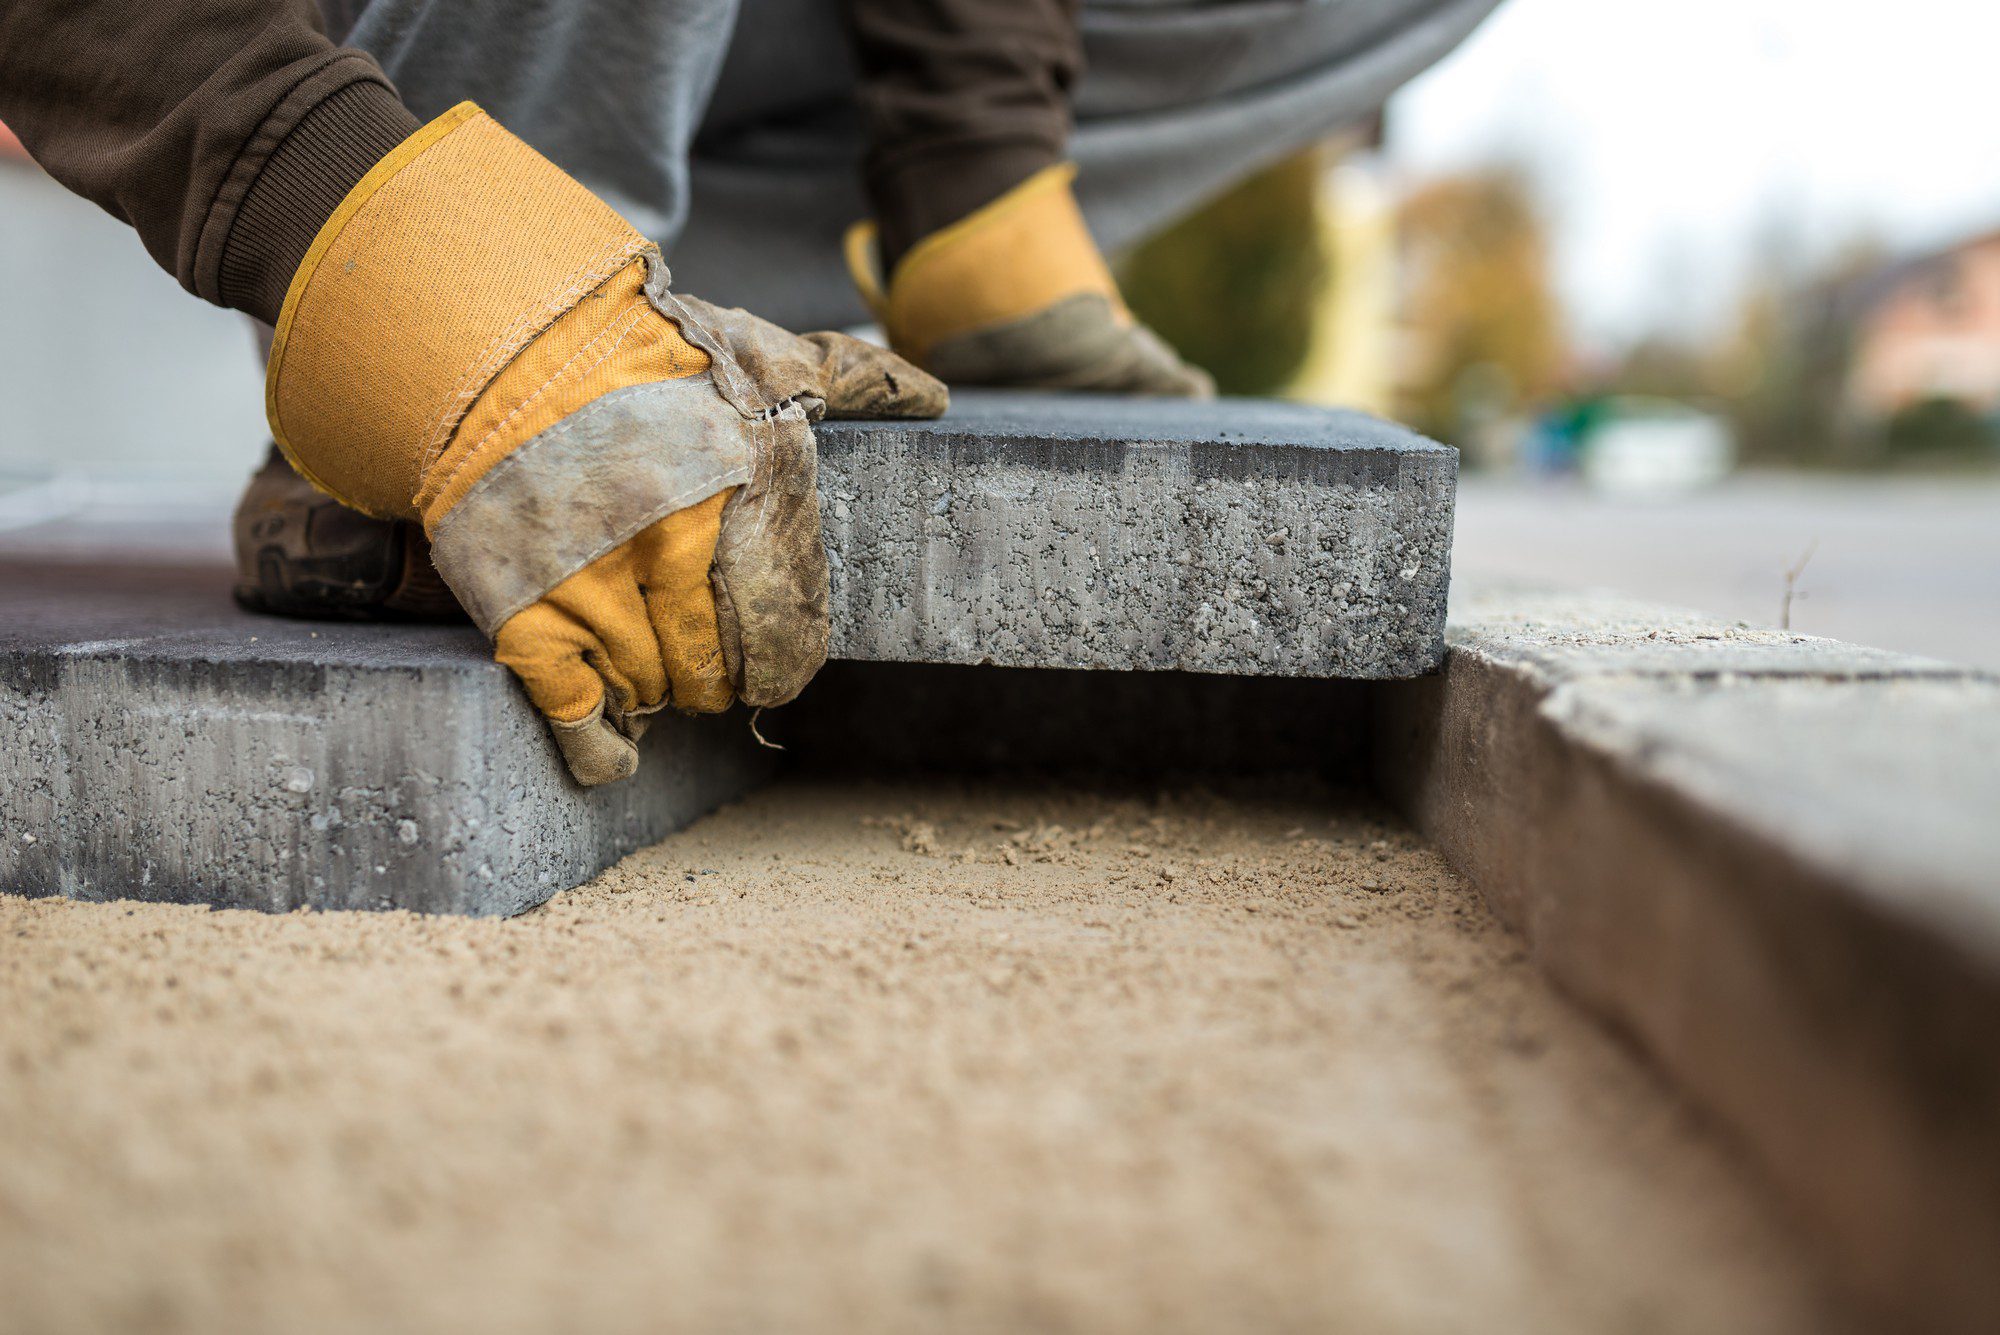 The image shows a close-up view of a person's hands wearing work gloves and laying a concrete paving stone or slab. Only the hands and part of the legs of the person are visible, and they are in the process of precisely placing or adjusting the concrete slab on what appears to be a bed of sand, which is a common base for laying pavers. The person seems to be engaging in some sort of construction or landscaping work. In the background, you can see a blurred urban or suburban street environment. The focus on the hands and the paver emphasizes manual labour and the craftsmanship involved in such work.